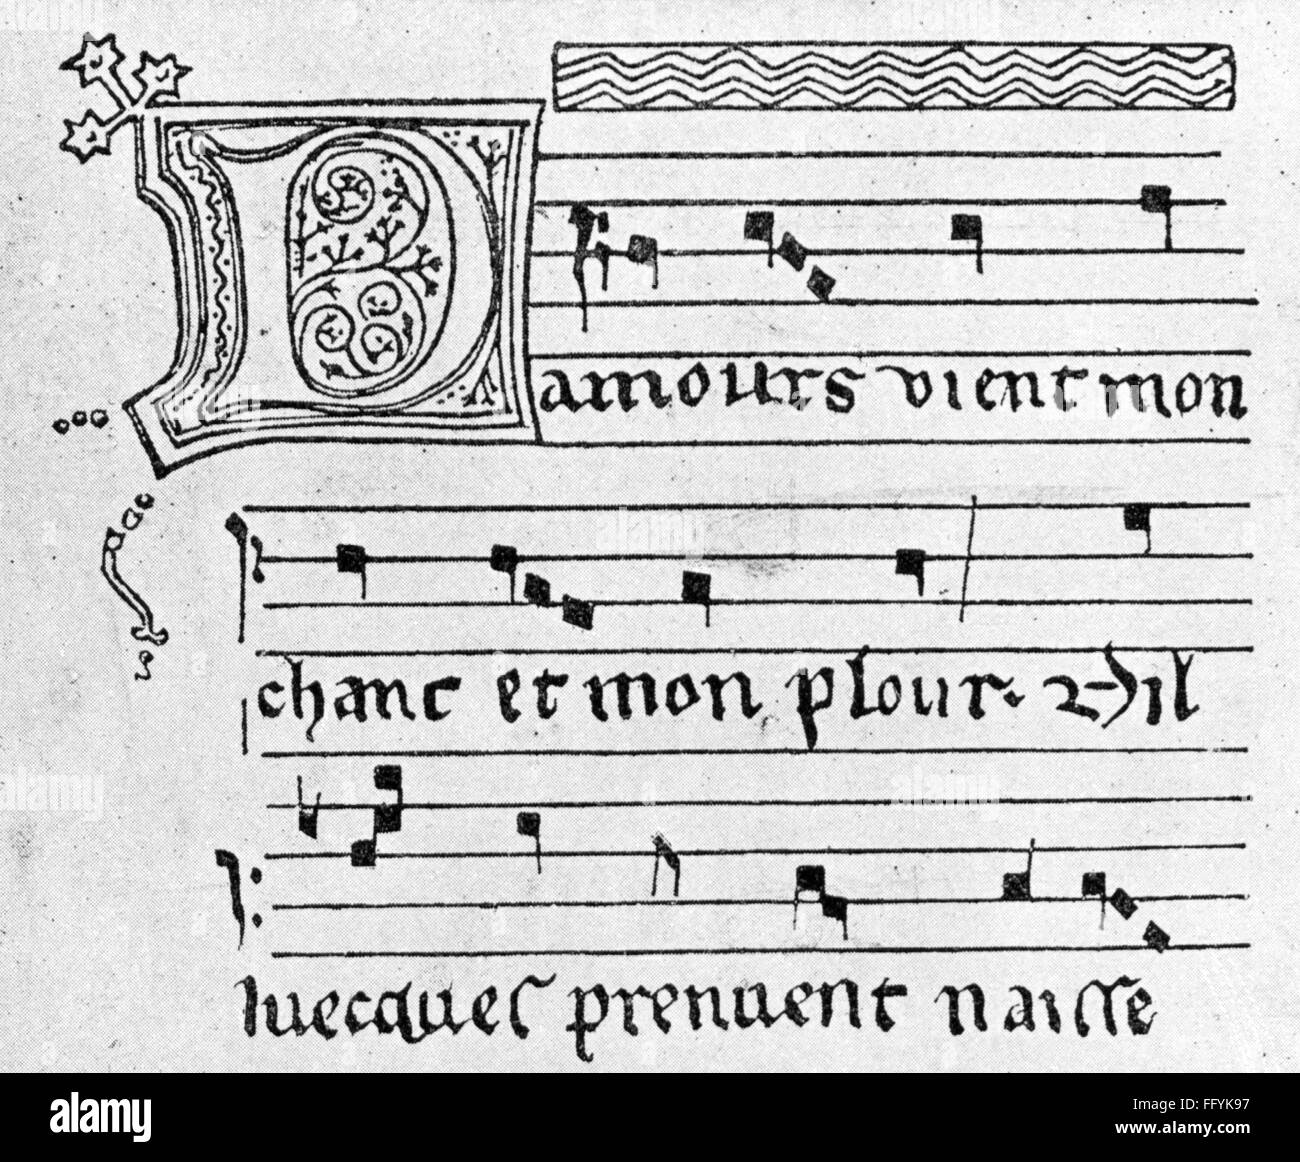 Musik, Noten, Notation der nordfranzösischen Trouveurs, 13./14. Jahrhundert, Troubadour, Notation, Notationen, neume, stave, script, scripts, handscript, handwriting, handwritings, French, Langues d'oil, Oil, words, Lyrics, Middle Ages, Northern France, North of France, Trouvères, Notes, Note, Historic, Historical, NOT, Additional-Rights-Clearences-not available Stockfoto